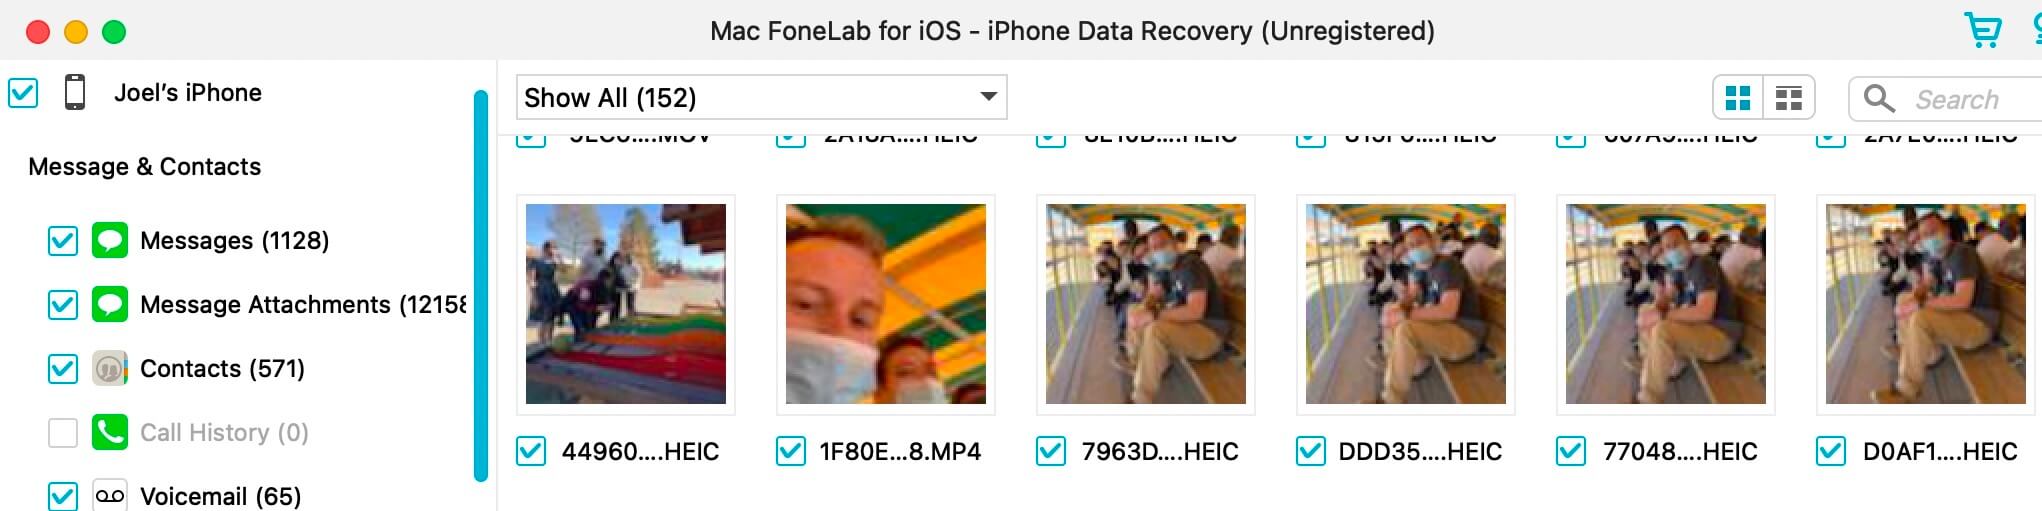 FoneLab iPhone Data Recovery 10.5.52 free downloads